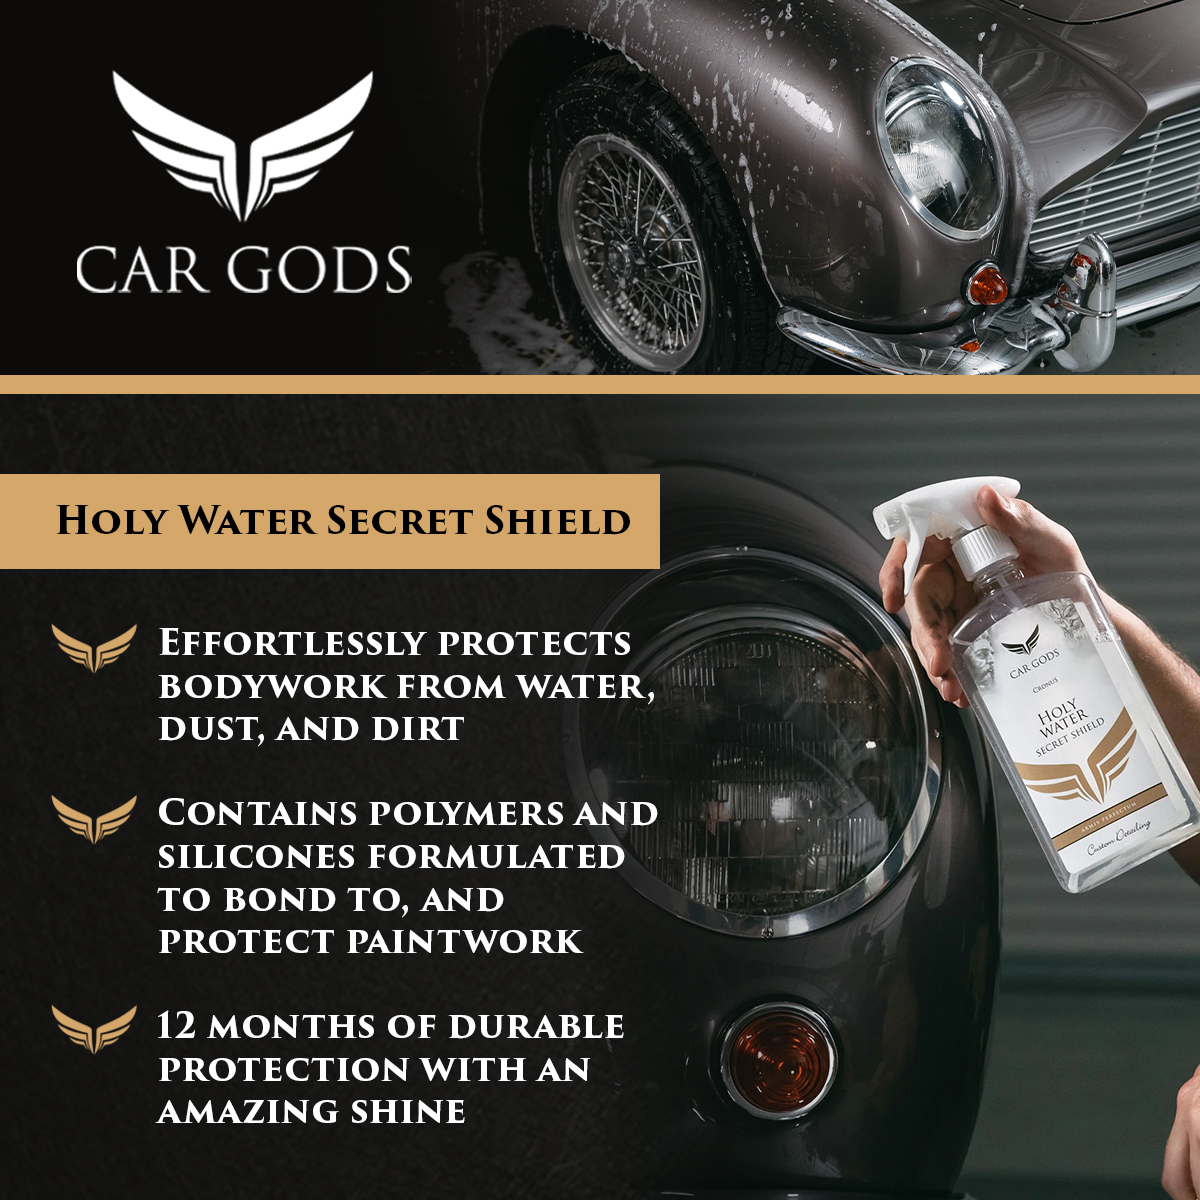 Car Gods Holy Water Secret Shield. Long-lasting, durable protective shield effortlessly protects car bodywork from water, dust and dirt. Simply spray on and wipe off to protect paintwork with polymers and silicones that are formulated to bond to and create a hydrophobic coating on paintwork.